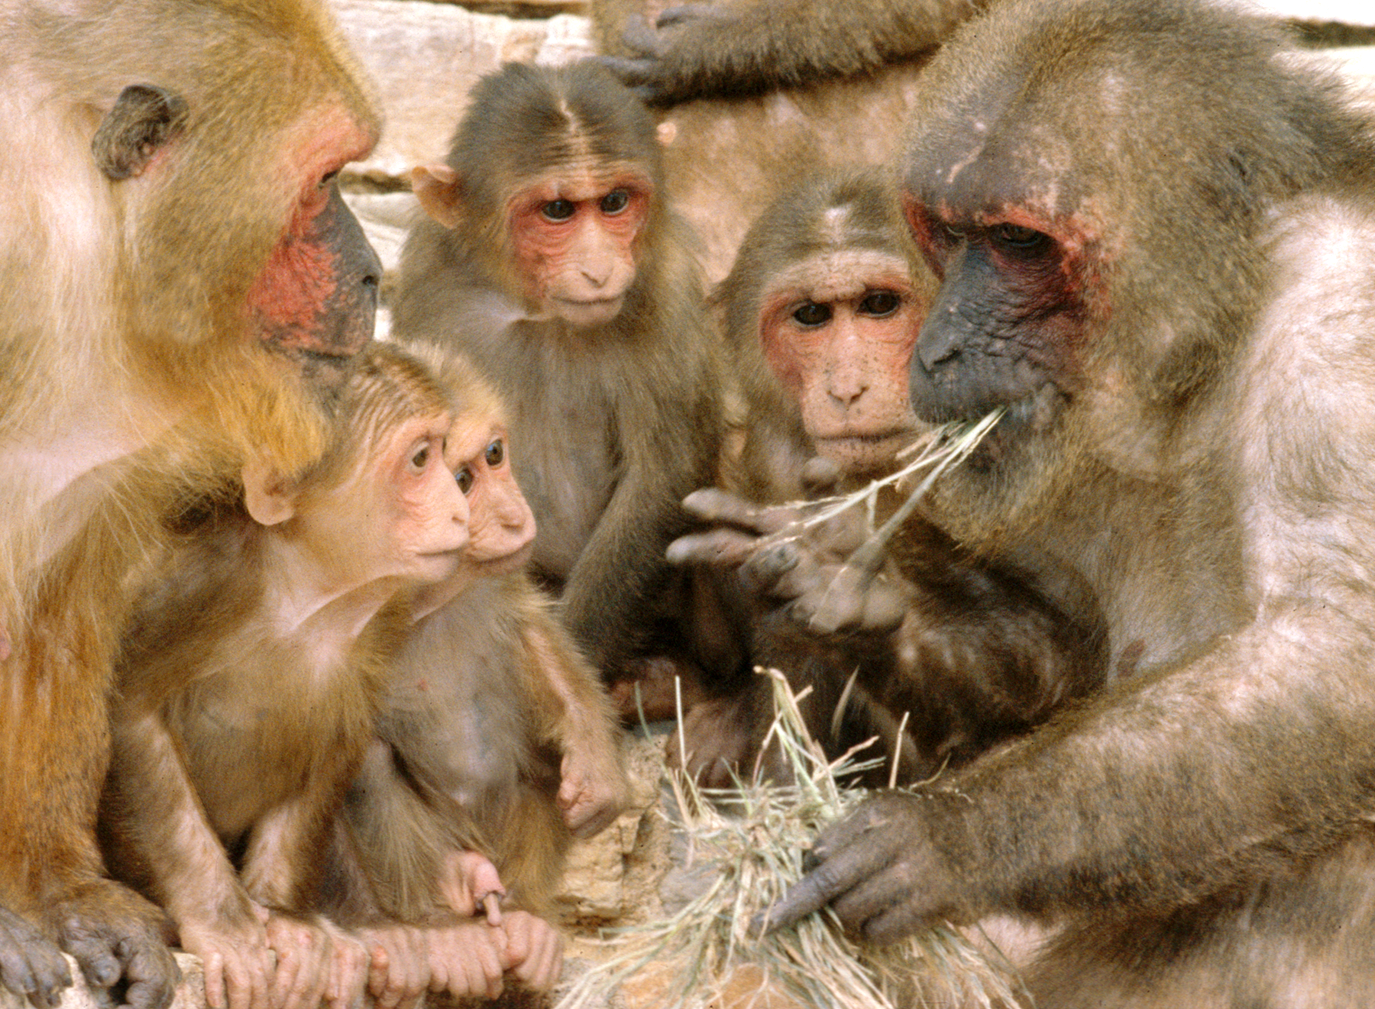 A tribe of stump tail macaques (Macaca arctoides) watch their alpha male eating.   Macaques making meaningful gestures, such as grabbing for food, triggers the same mirror neurone network in the animal performing the action and the observers. (Image: Wikimedia commons)  